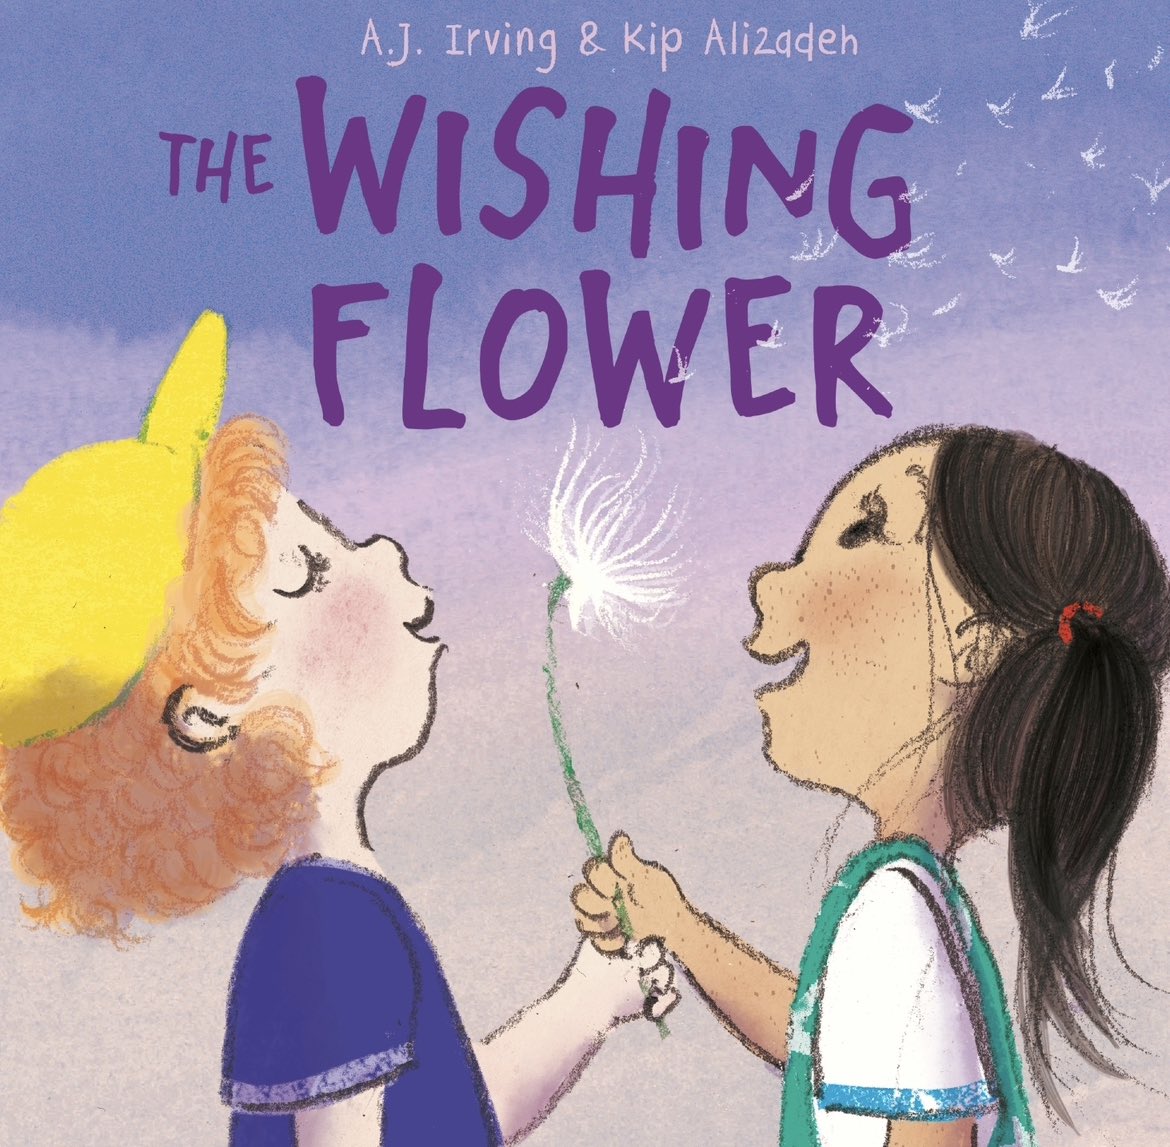 @skyekilaen THE WISHING FLOWER by @kipalizadeh and me comes out just in time for Pride from @KnopfBFYR! 🌈

“This book will inspire readers to honor their wishes and show the world their truest selves.” #promoLGBTQIA #queerkidlit #librarytwitter #teachertwitter bit.ly/3mINJ7a